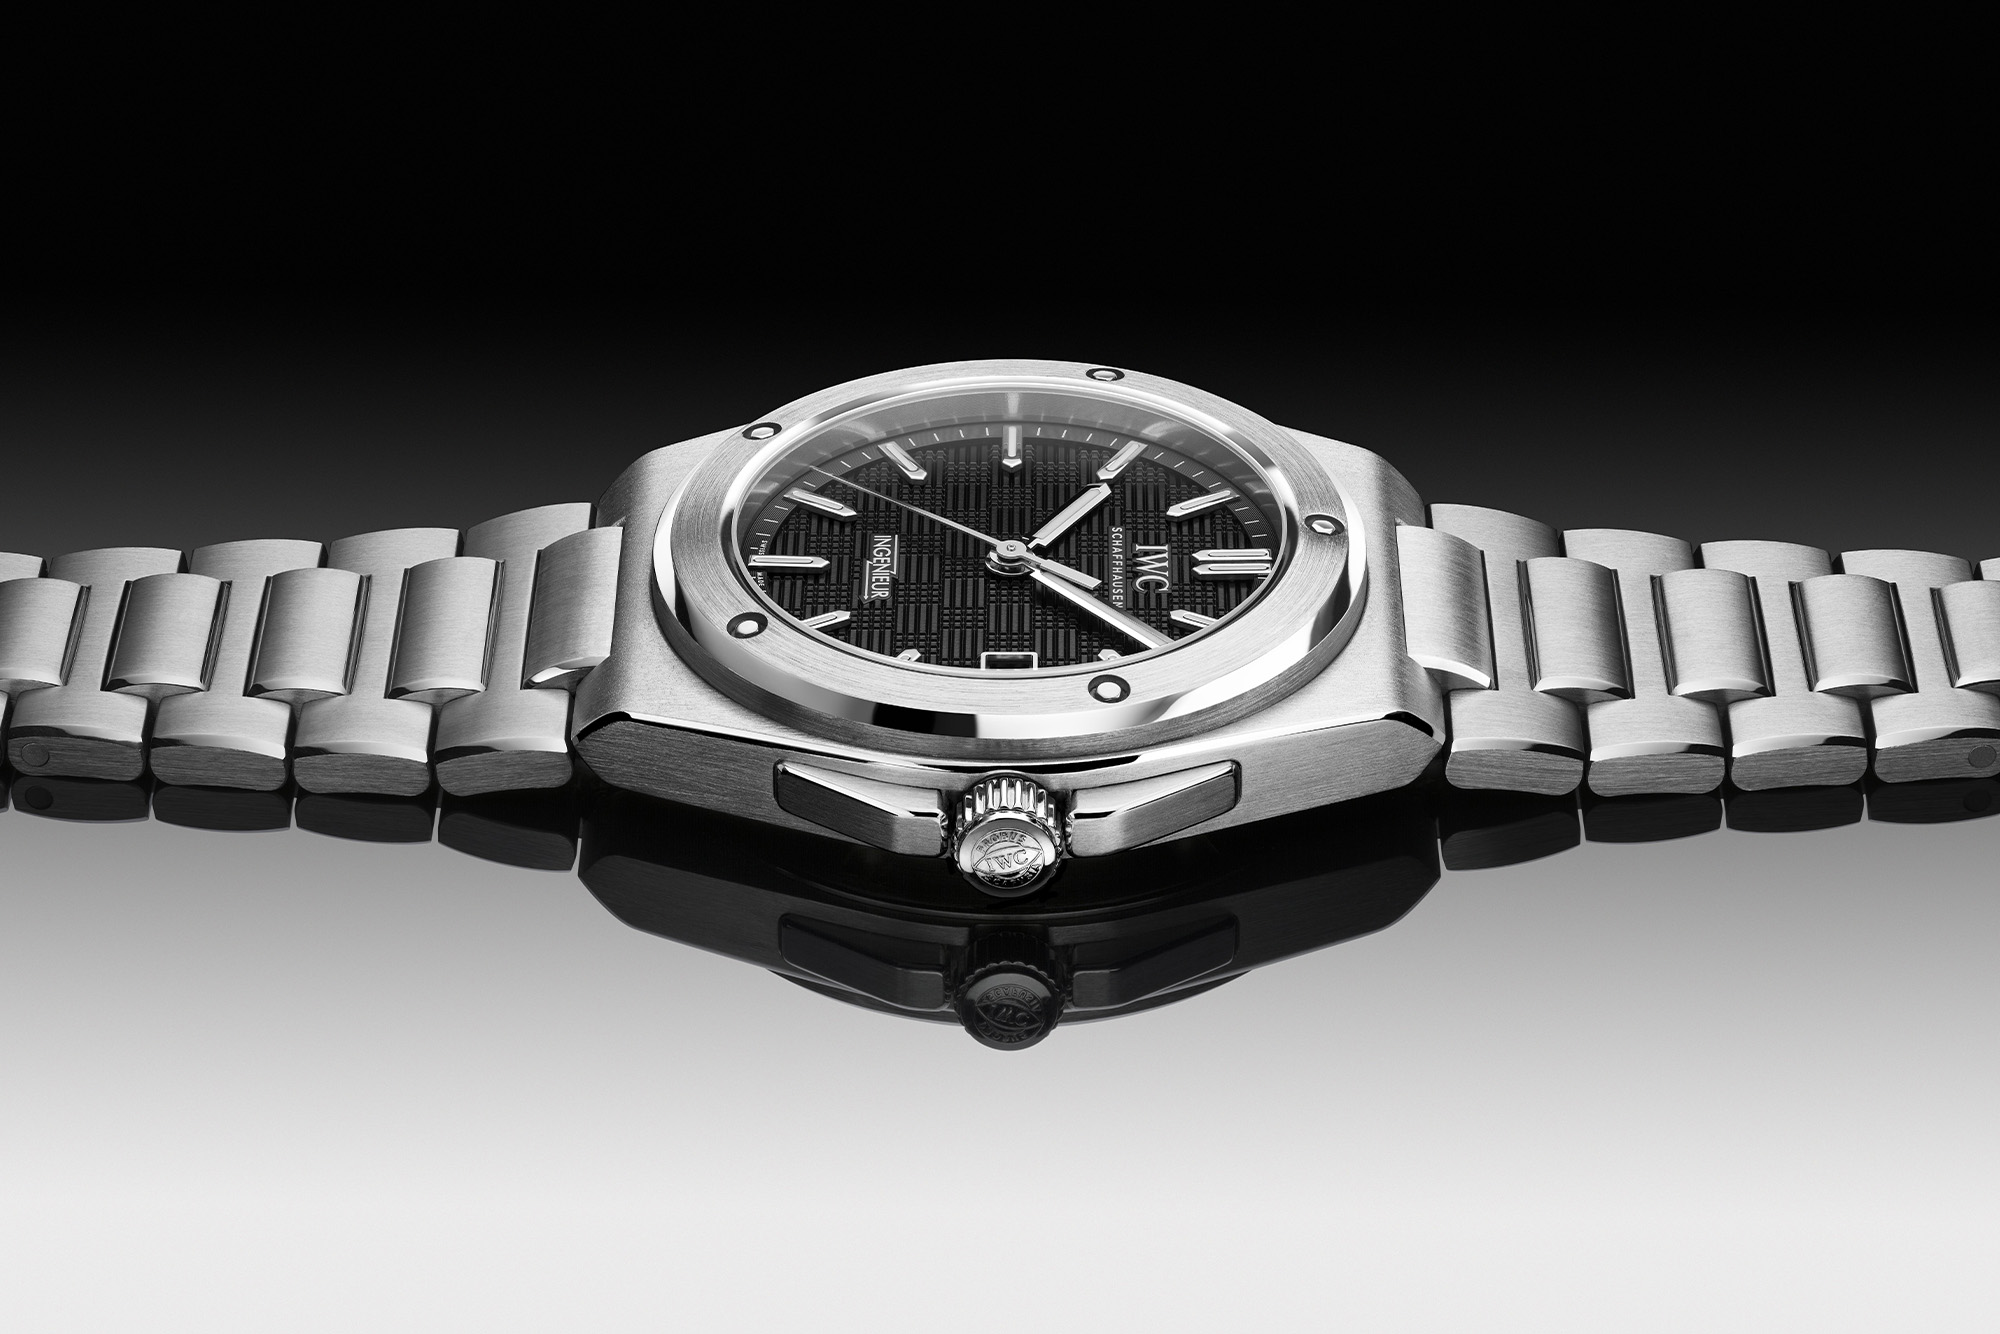 Ingenieur Automatic 40 lying on its side on a gradient black background